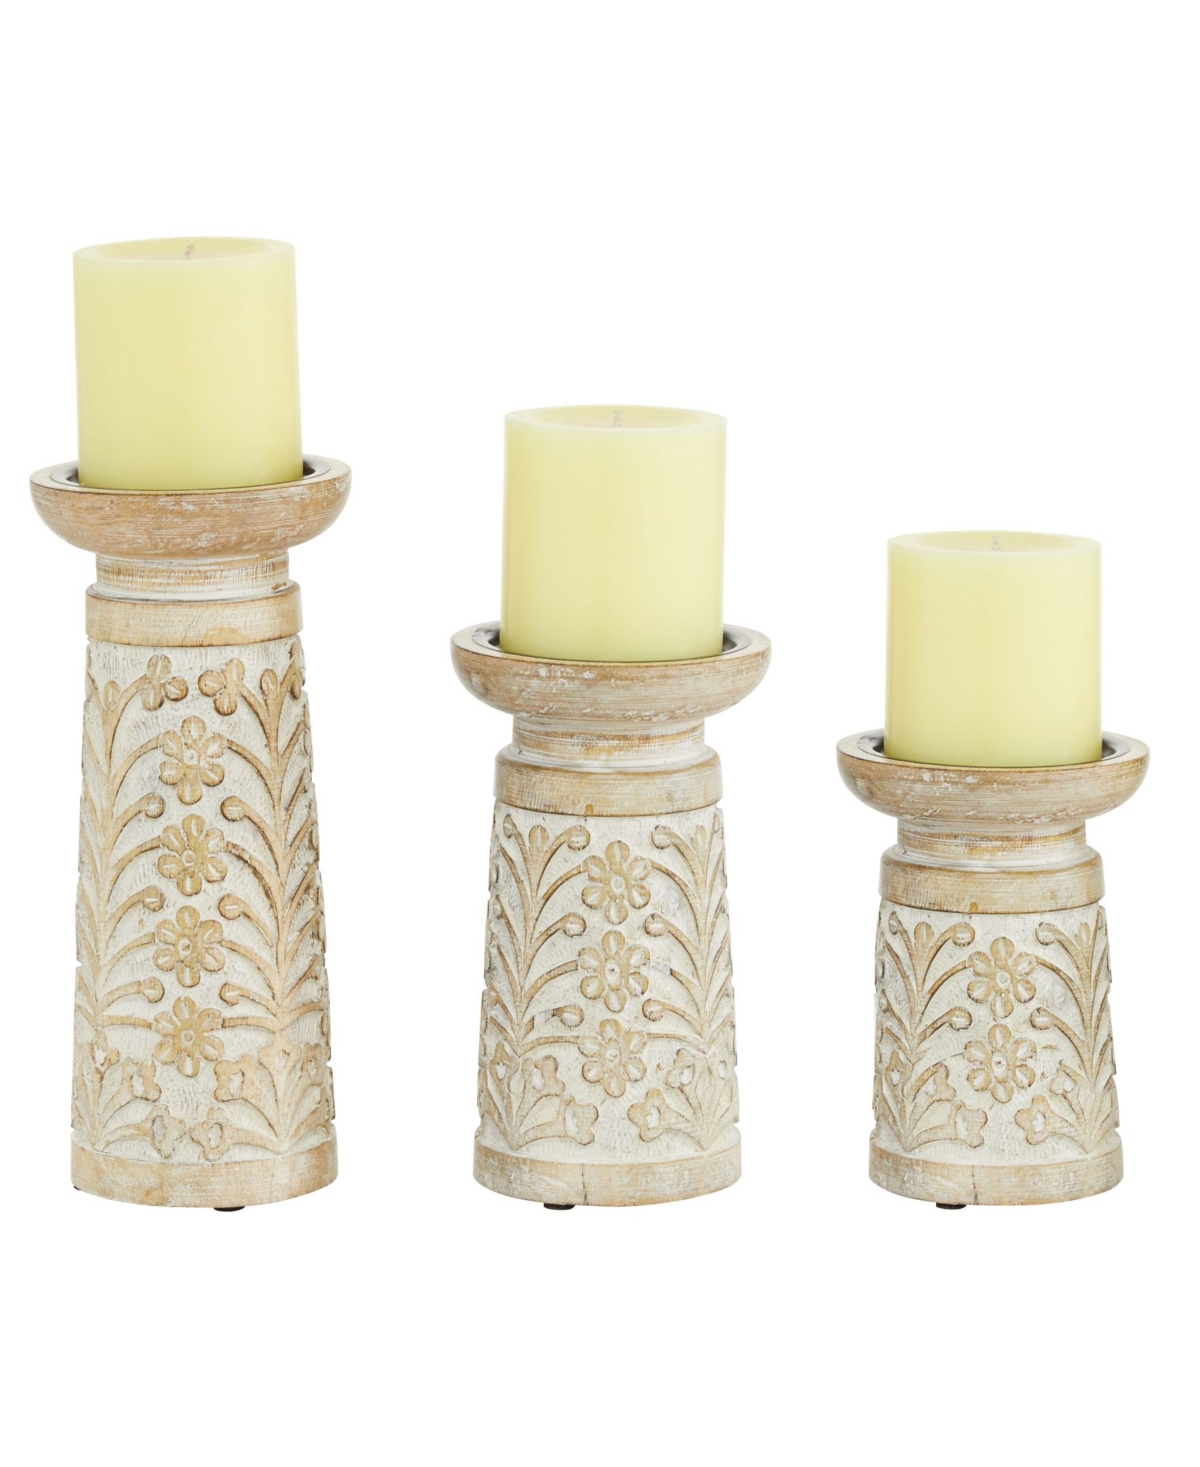 Rosemary Lane Natural Candle Holders, Set Of 3 In Whitewashed Natural Brown